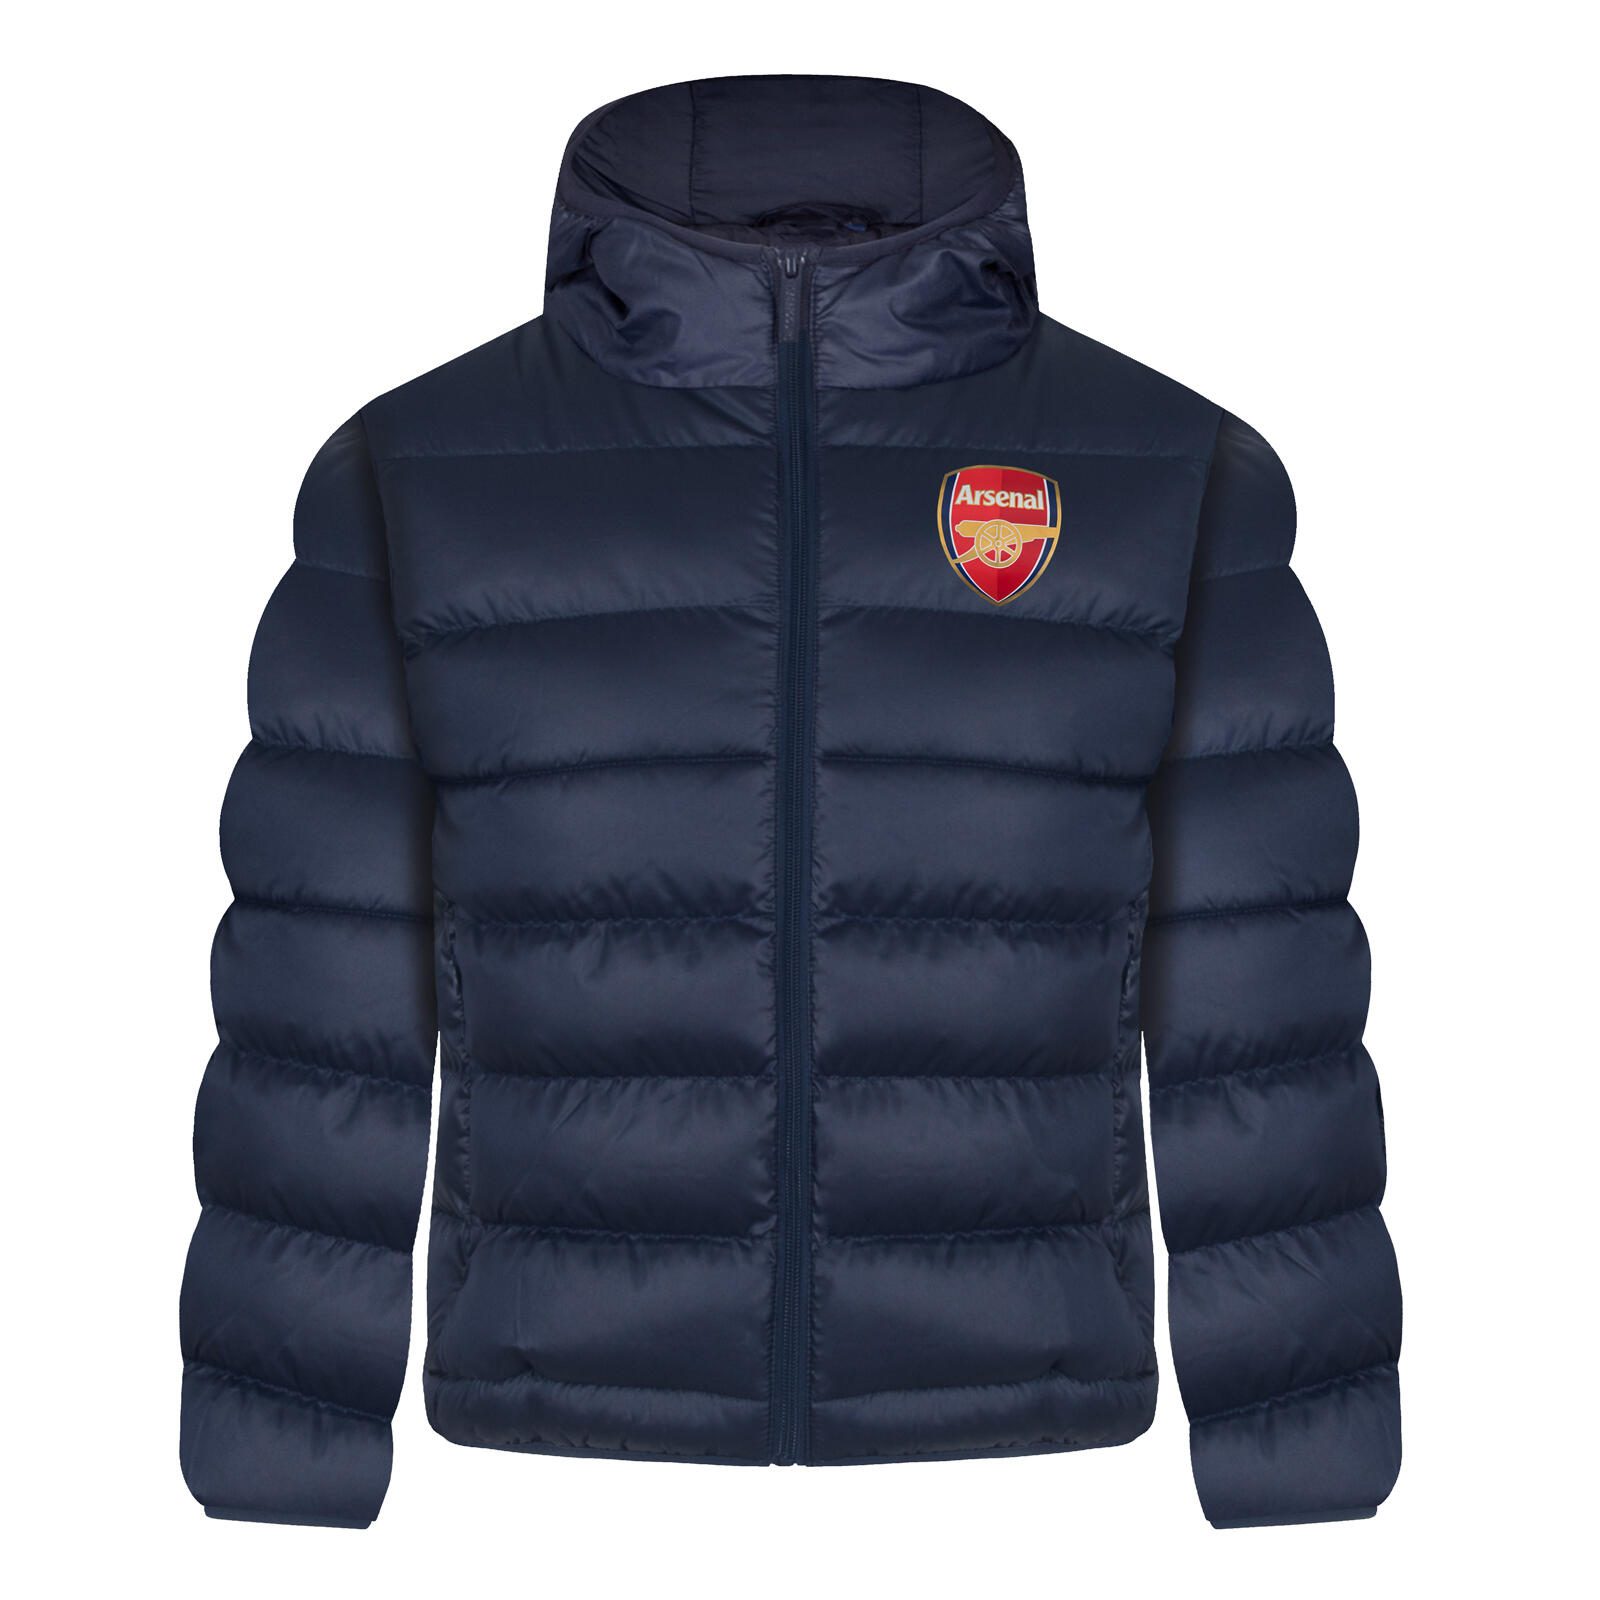 ARSENAL Arsenal FC Boys Jacket Hooded Winter Quilted Kids OFFICIAL Football Gift